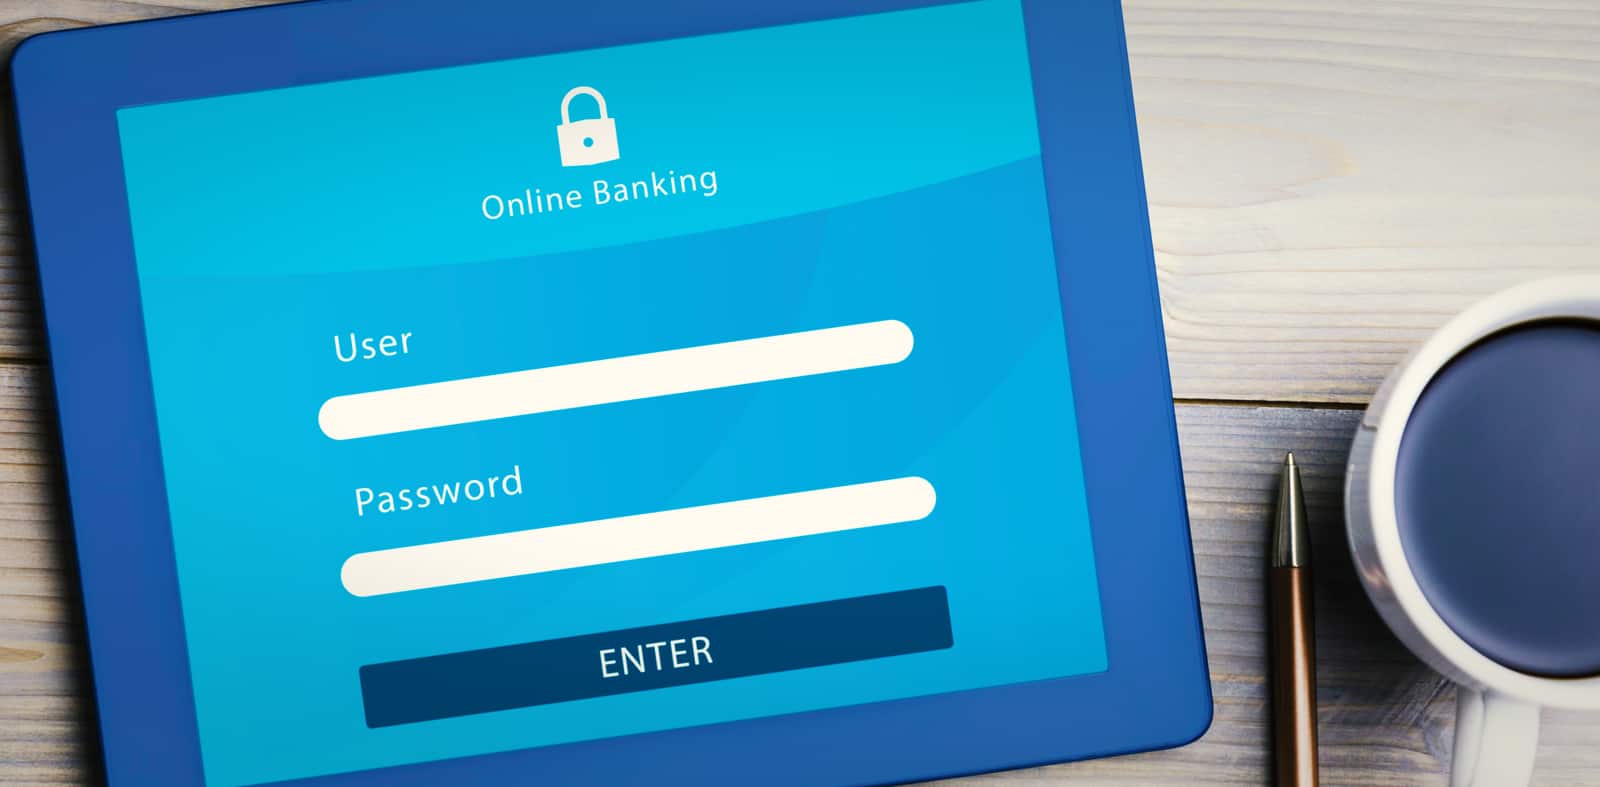 Online Banking - Cybersecurity in the Banking Sector